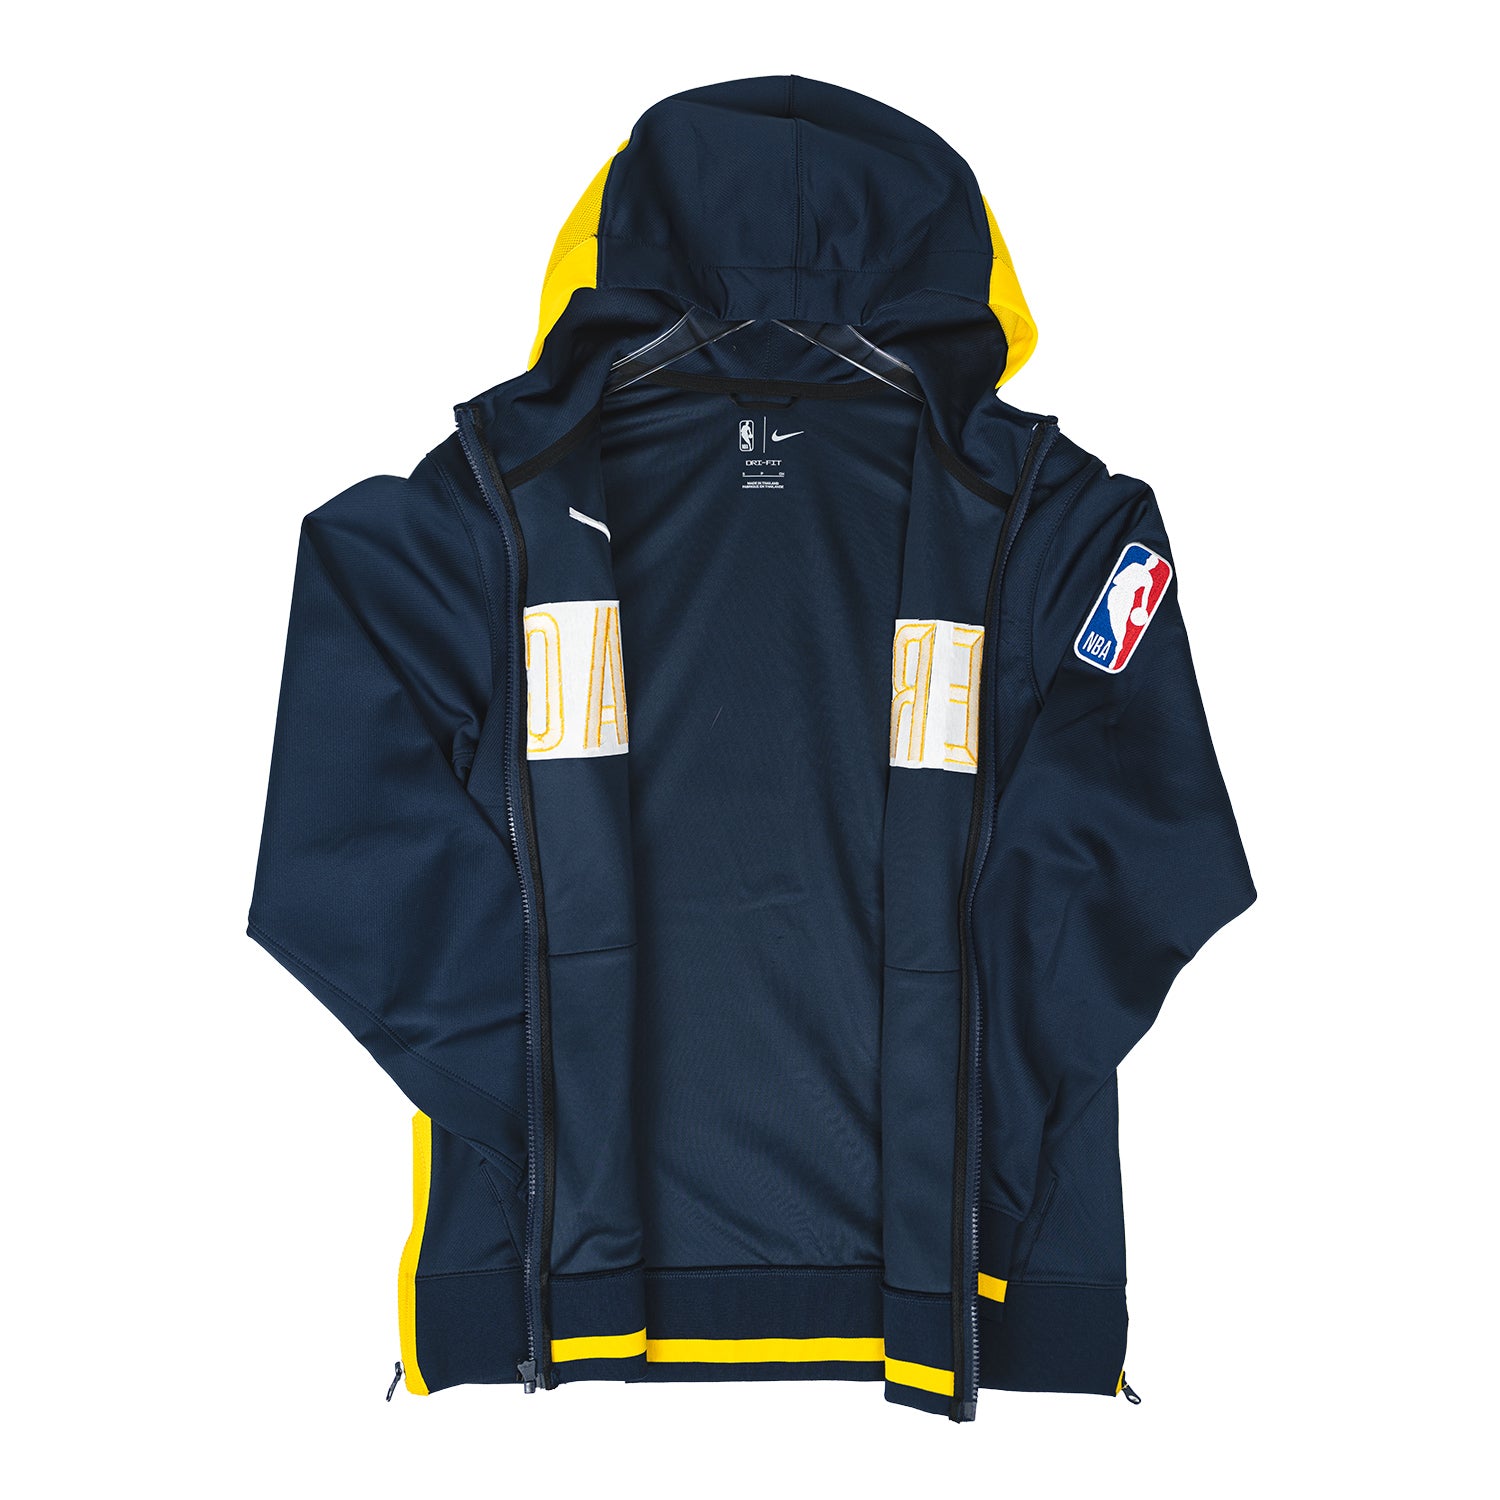 Golden State Warriors NBA Zip-up Hoodie Jacket Size Medium US Blue and Gold